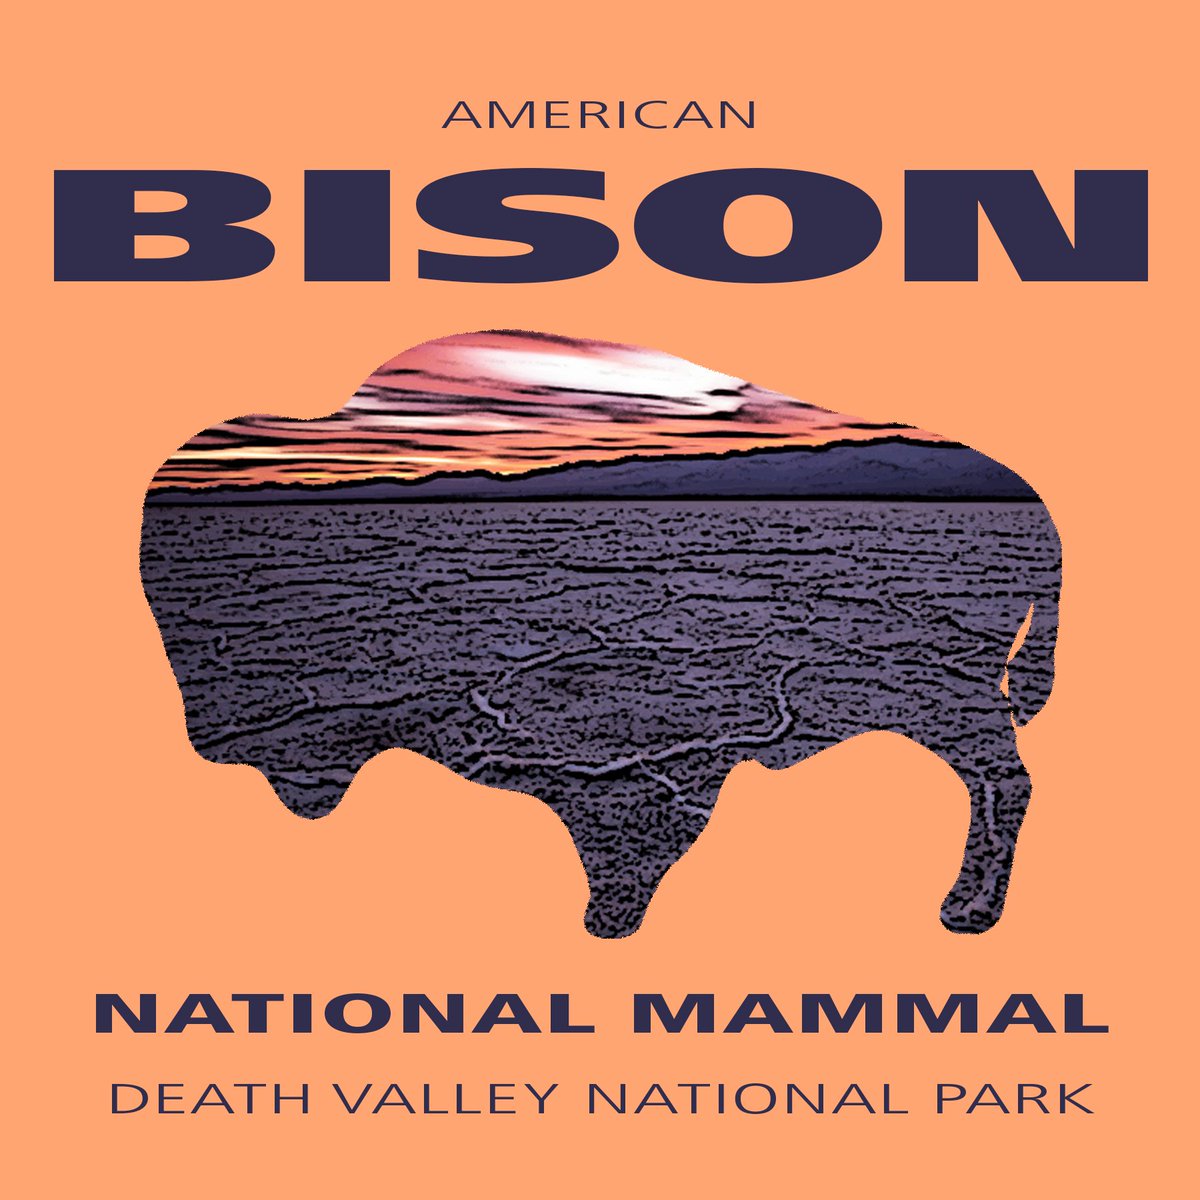 Though they don't live here, we still want to celebrate our #nationalmammal on #NationalBisonDay! Bison populations are recovering from < 1,000 individuals thanks to conservation measures. #Conservation nps.gov/subjects/bison…